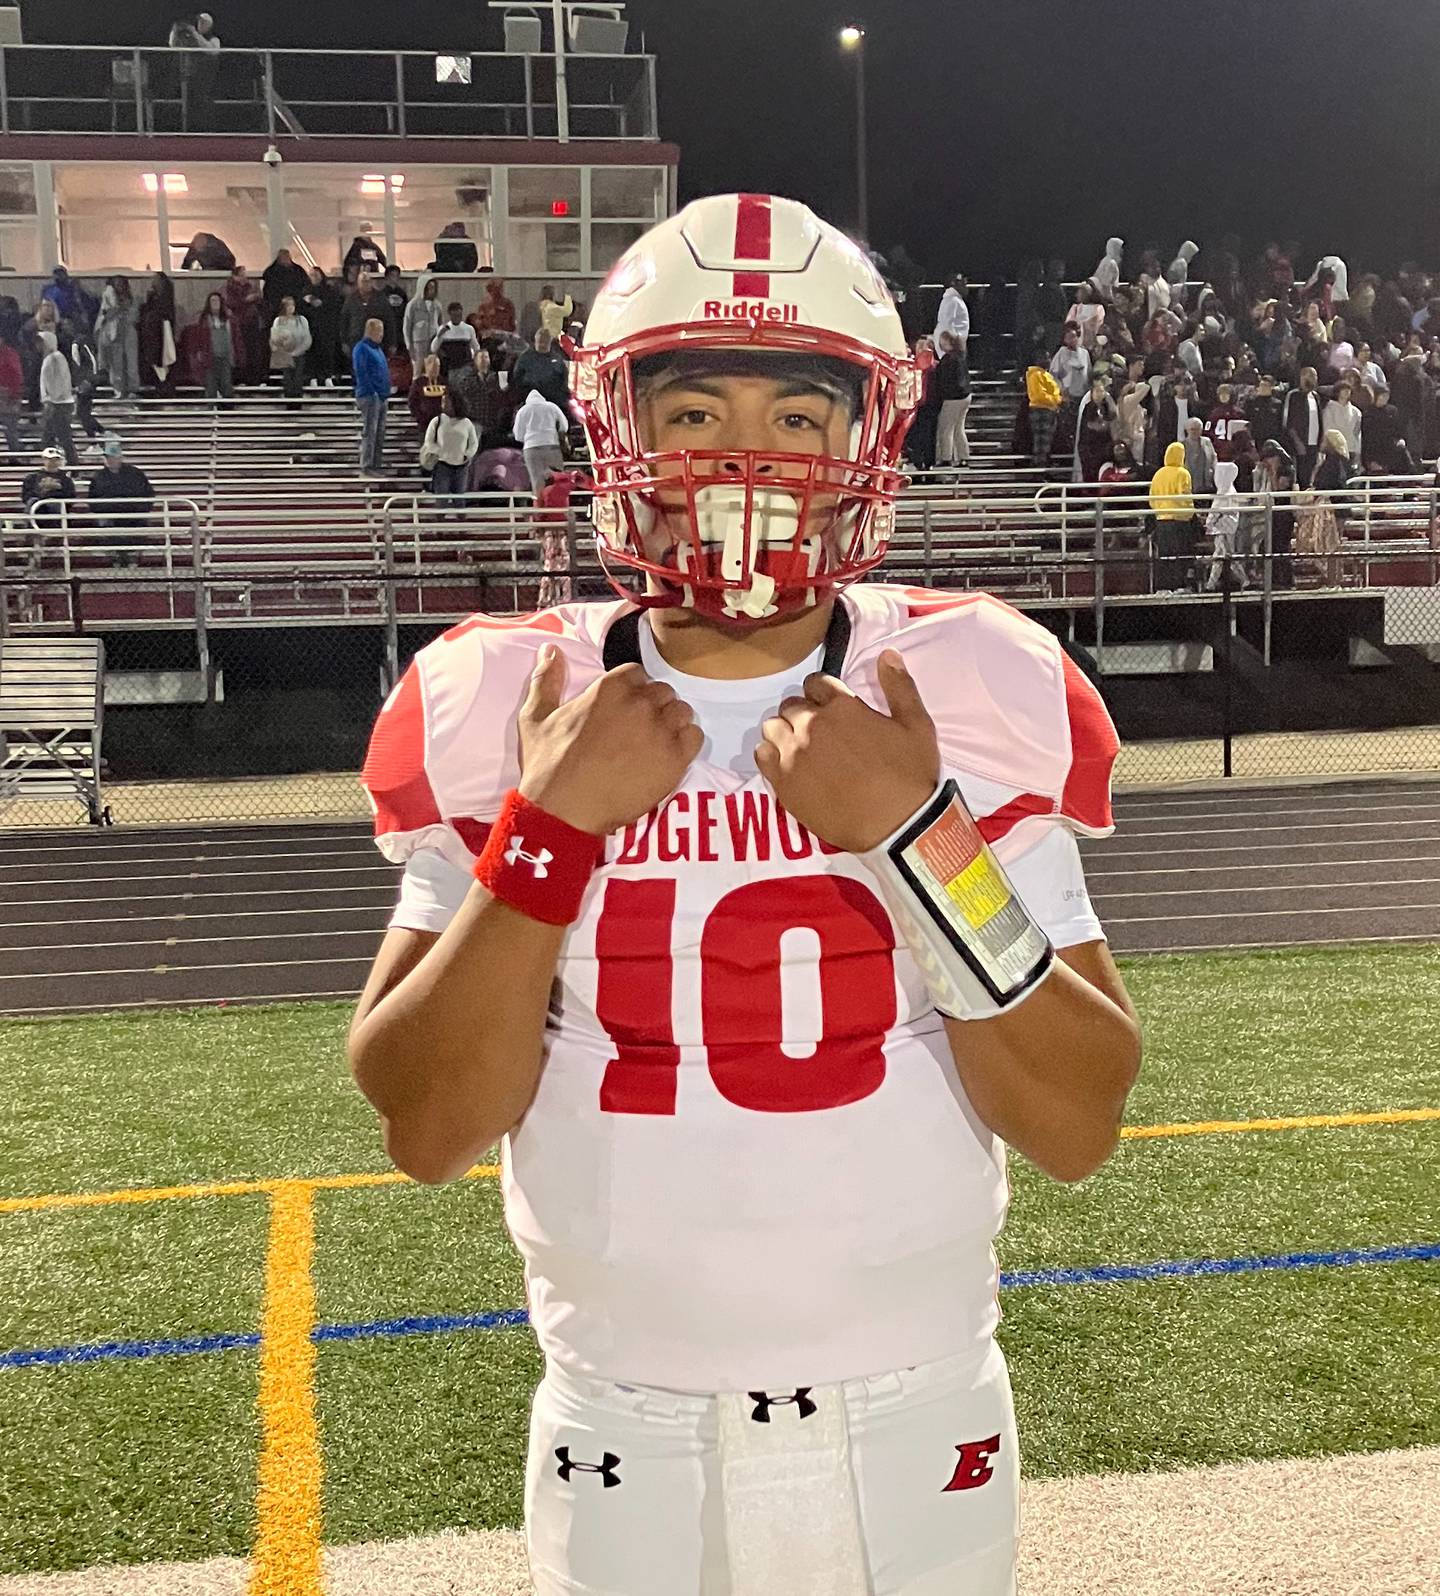 Edgewood quarterback Caesar Travers had another big game Friday, throwing for 203 yards and three touchdowns as the Rams defeated Harford Tech in an UCBAC Chesapeake football match in Harford County.